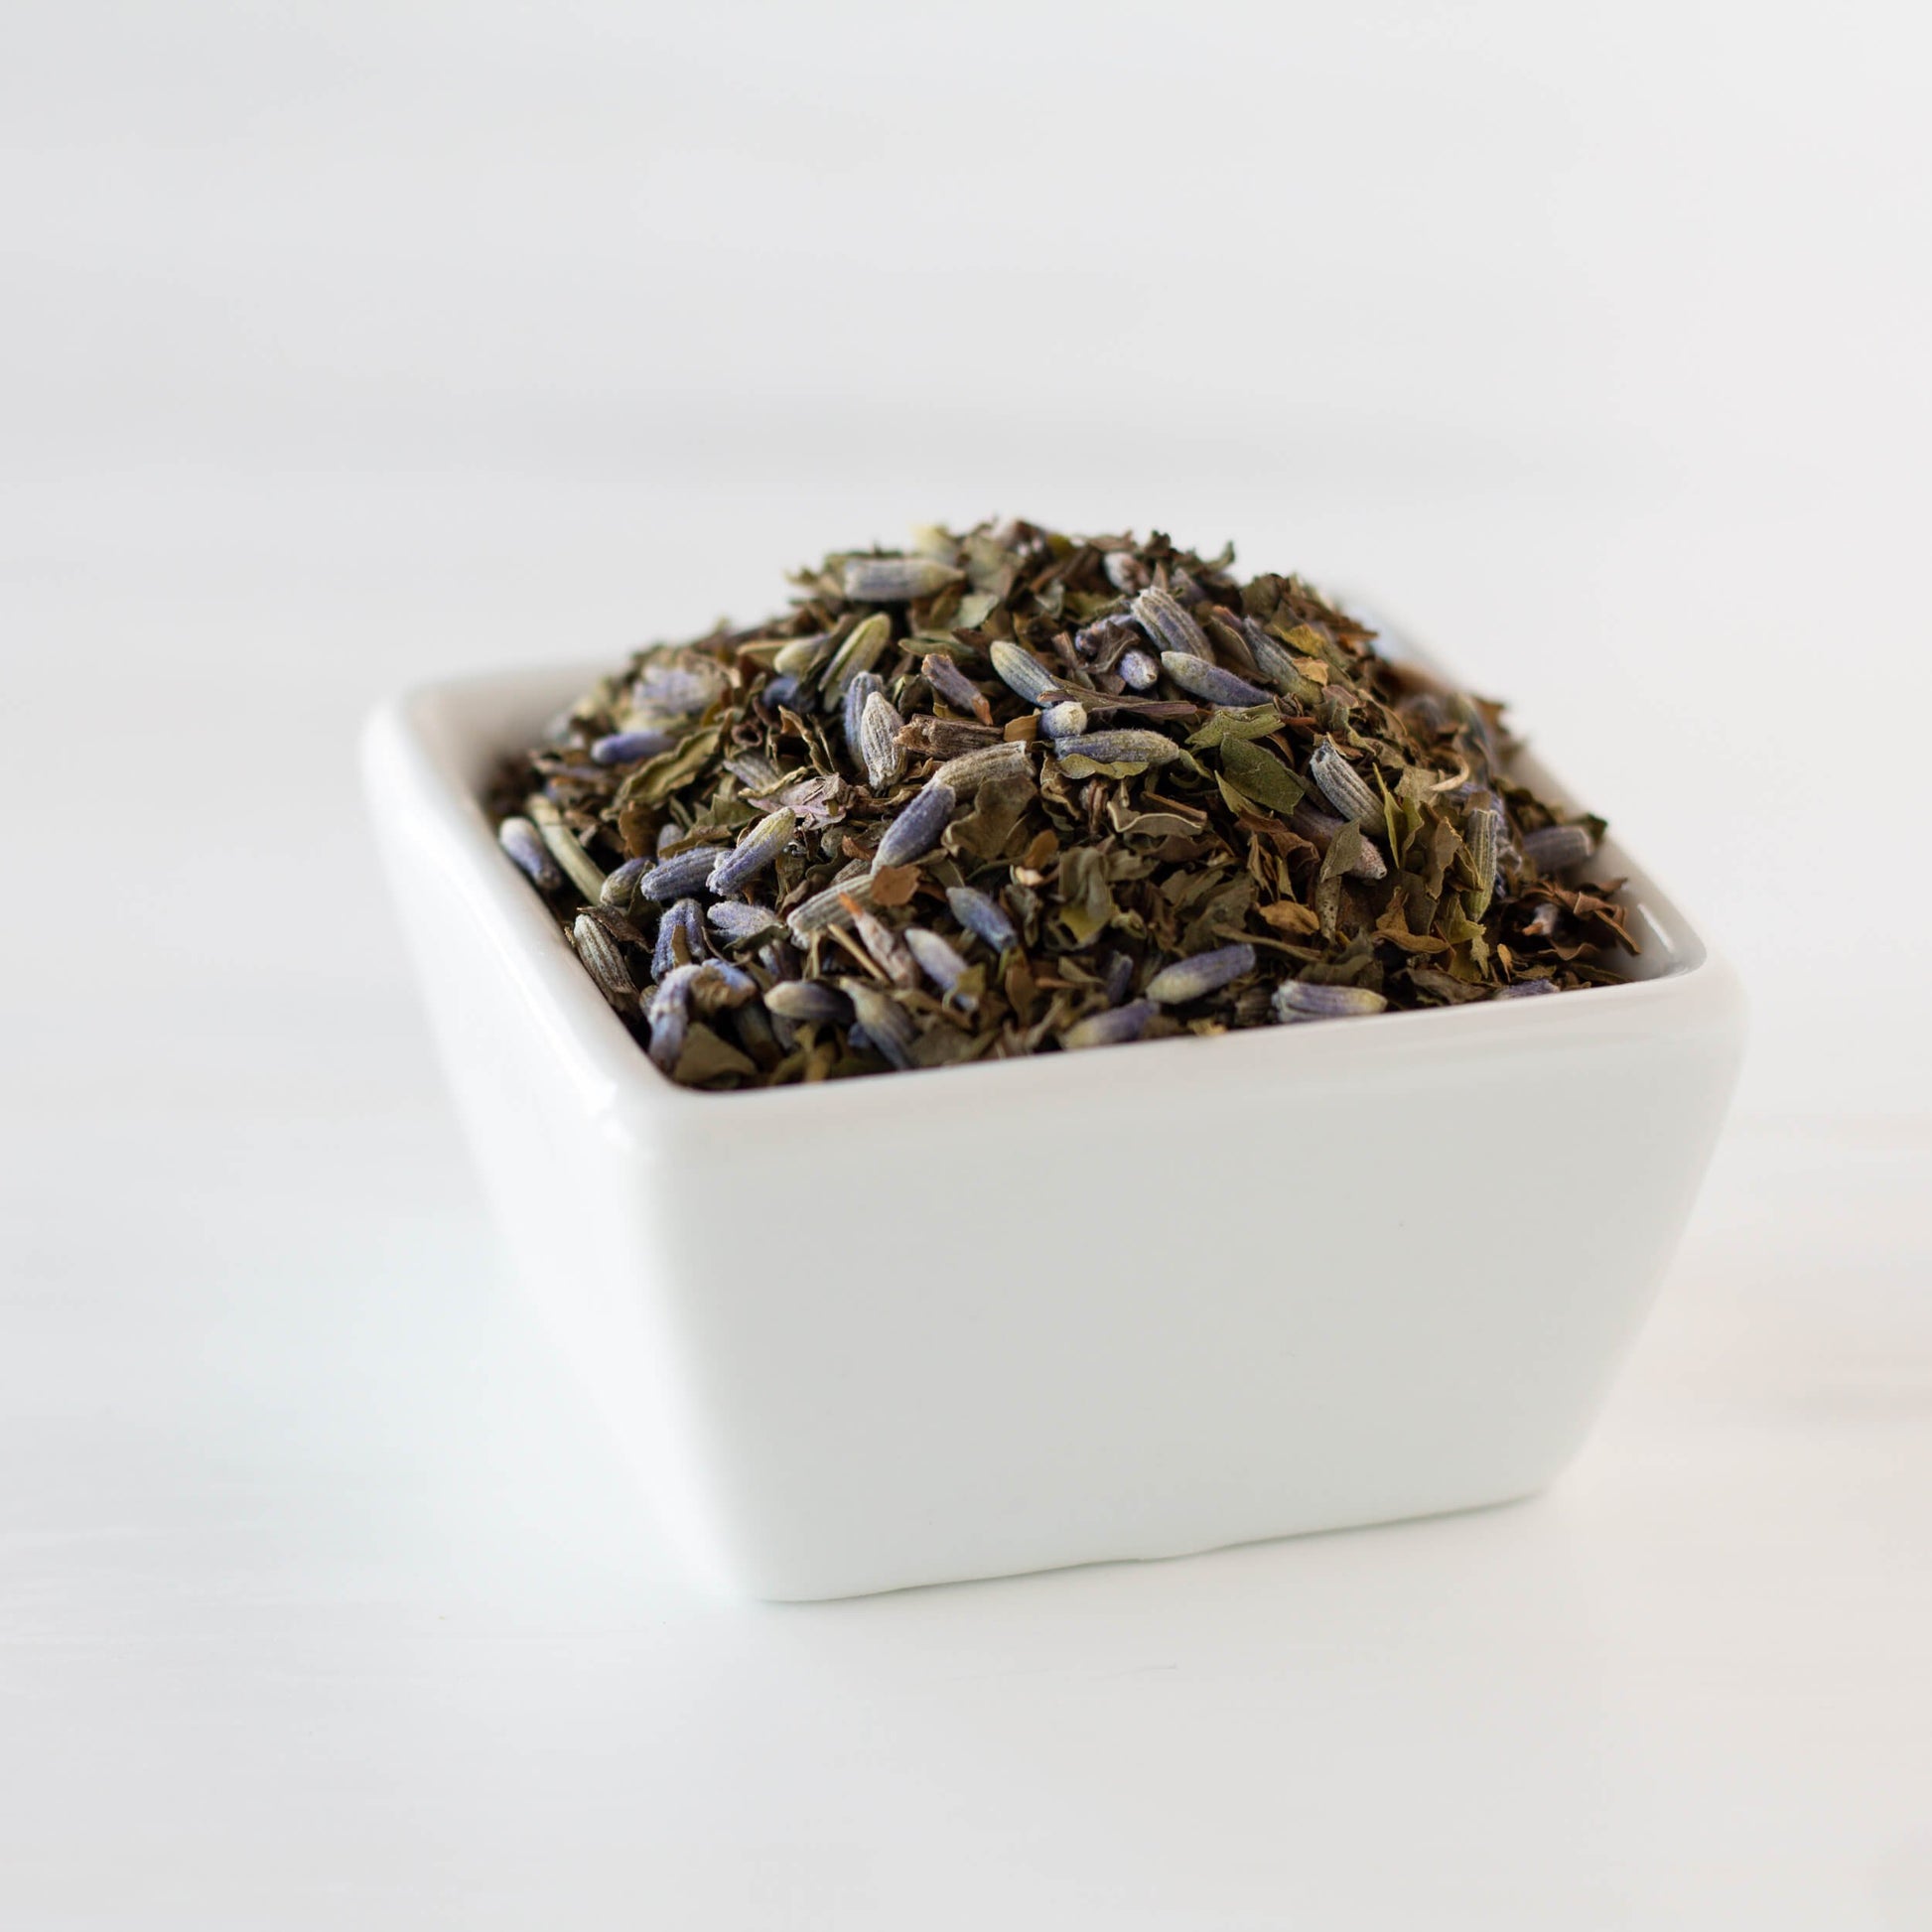 Lavender Mint Organic Herbal Tea shown in close up as loose tea leaves in a small square white dish